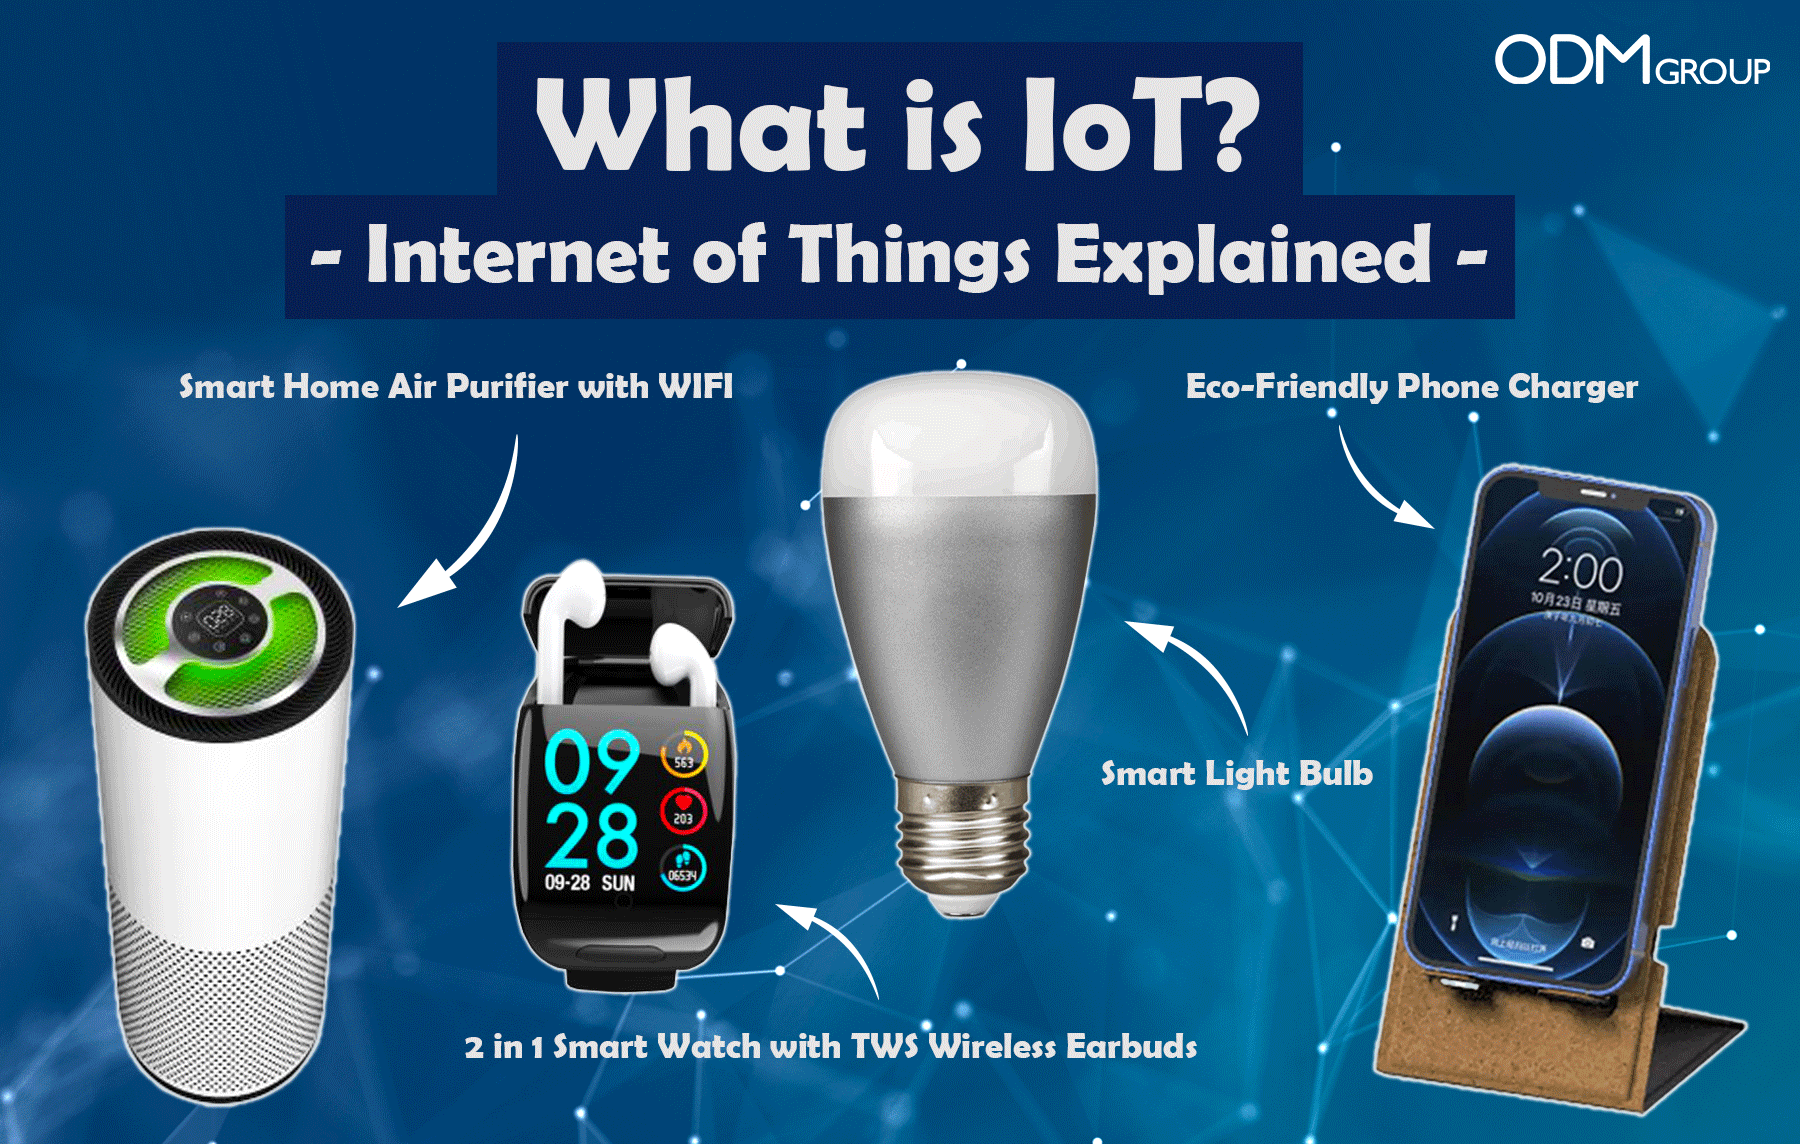 Examples of Internet of Things (IoT)